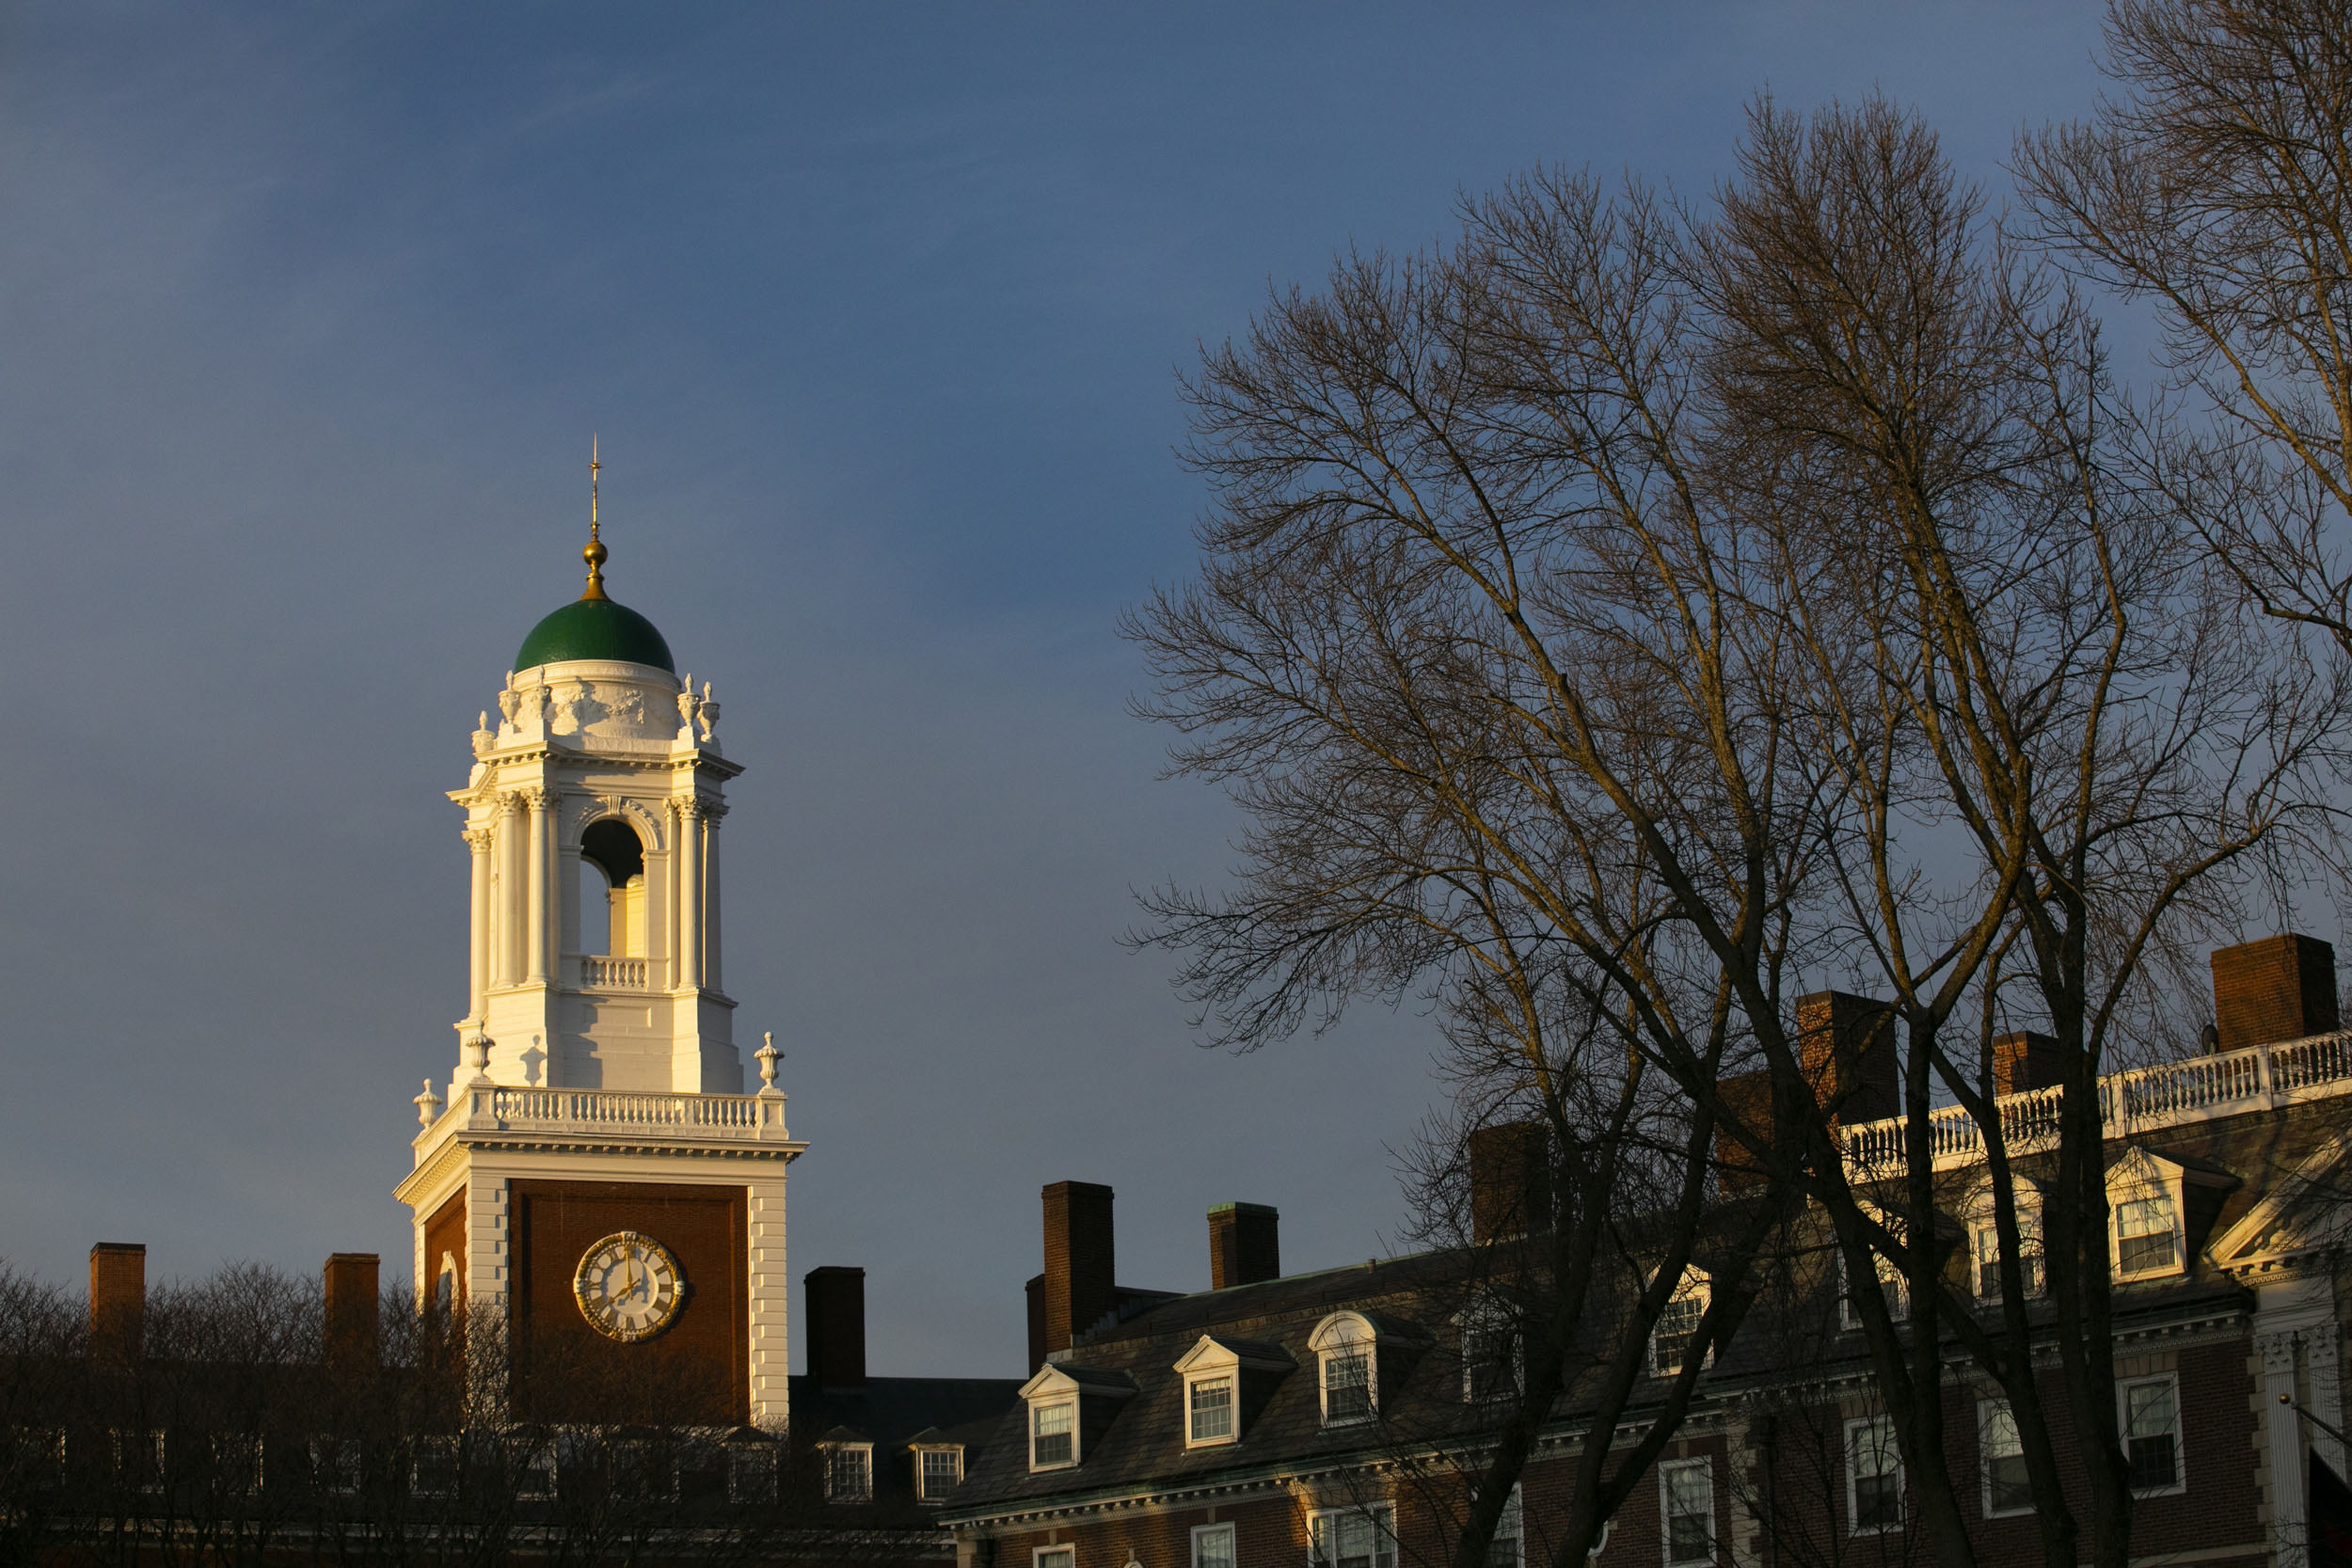 The cupola with green dome of Eliot House is pictured.